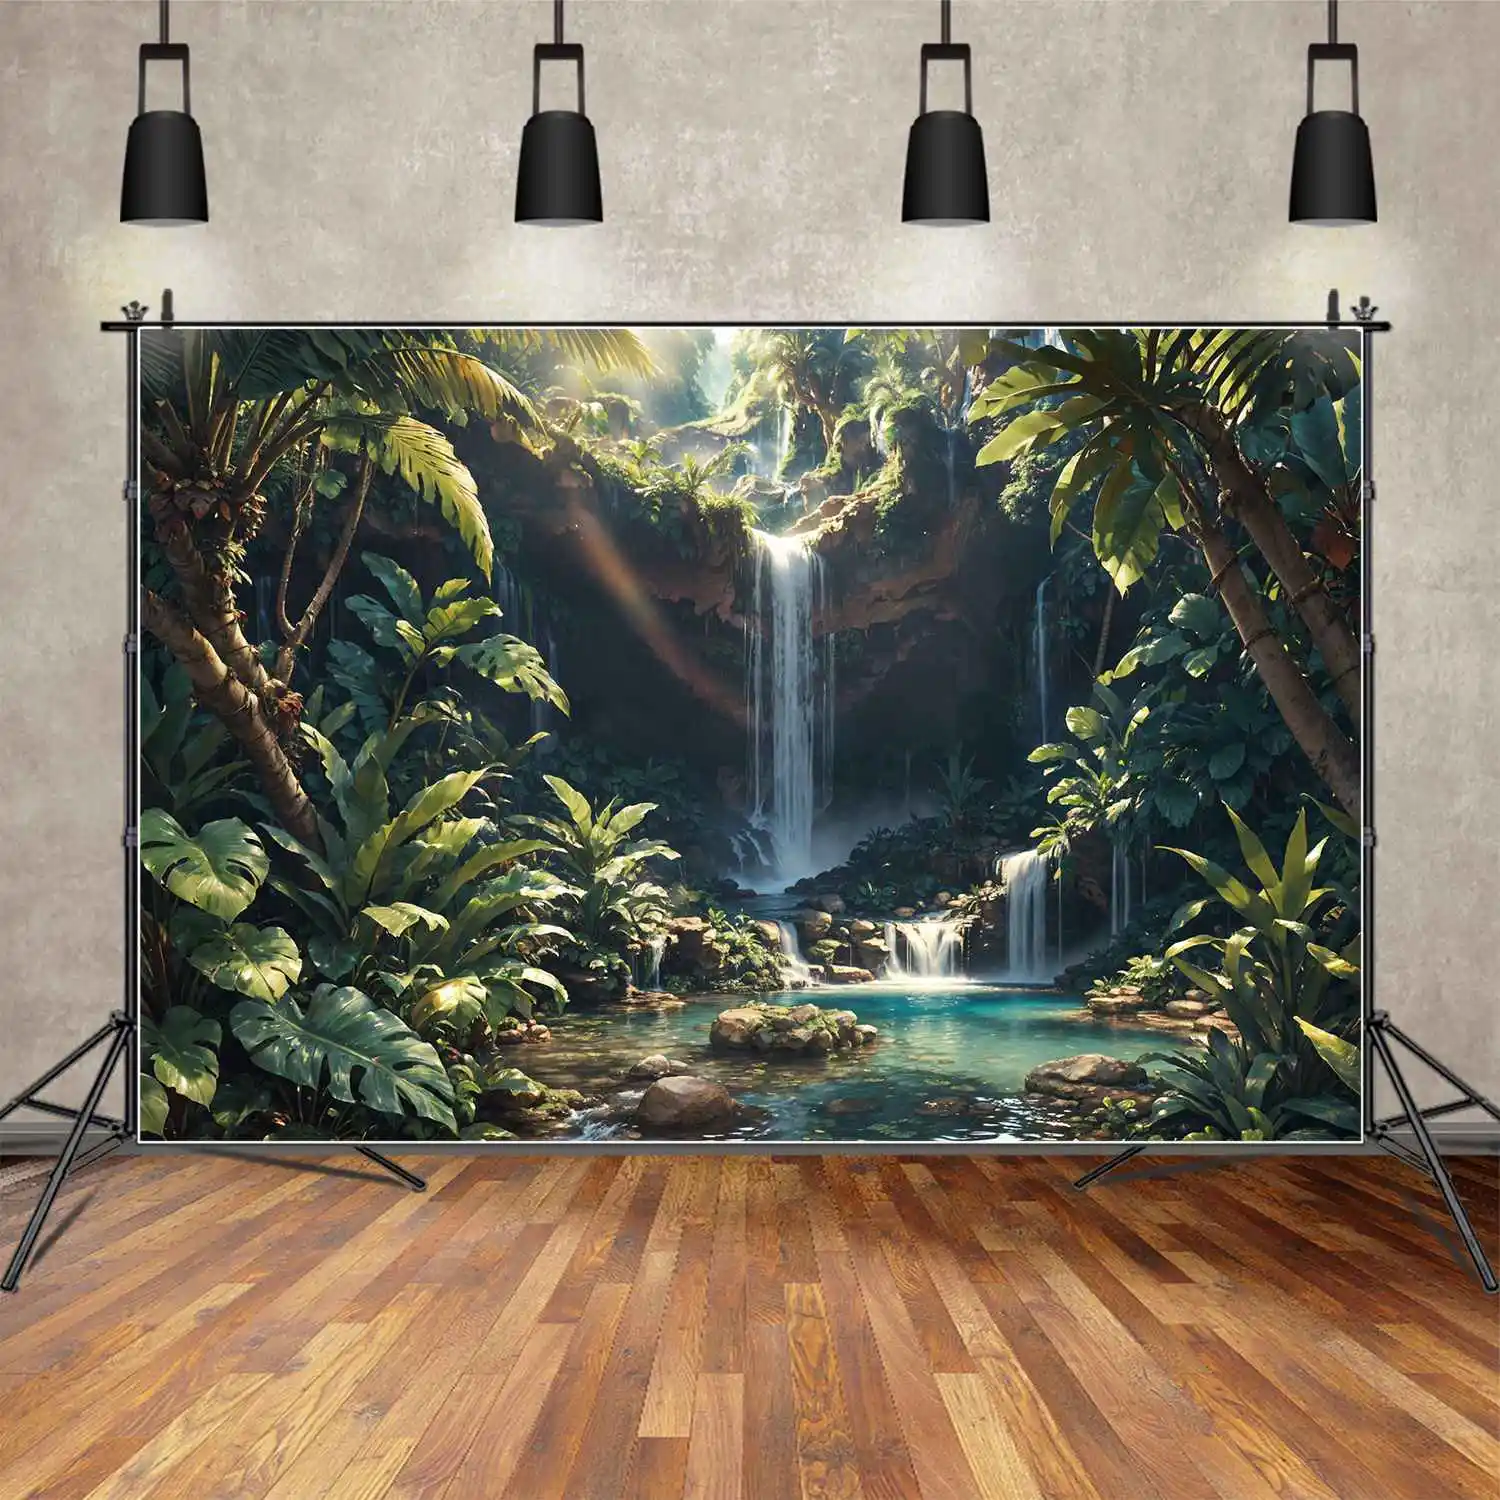 

Summer Waterfall Lake Photography Backdrops Decorations Tropical Custom Baby Photo Booth Photographic Backgrounds Studio Props